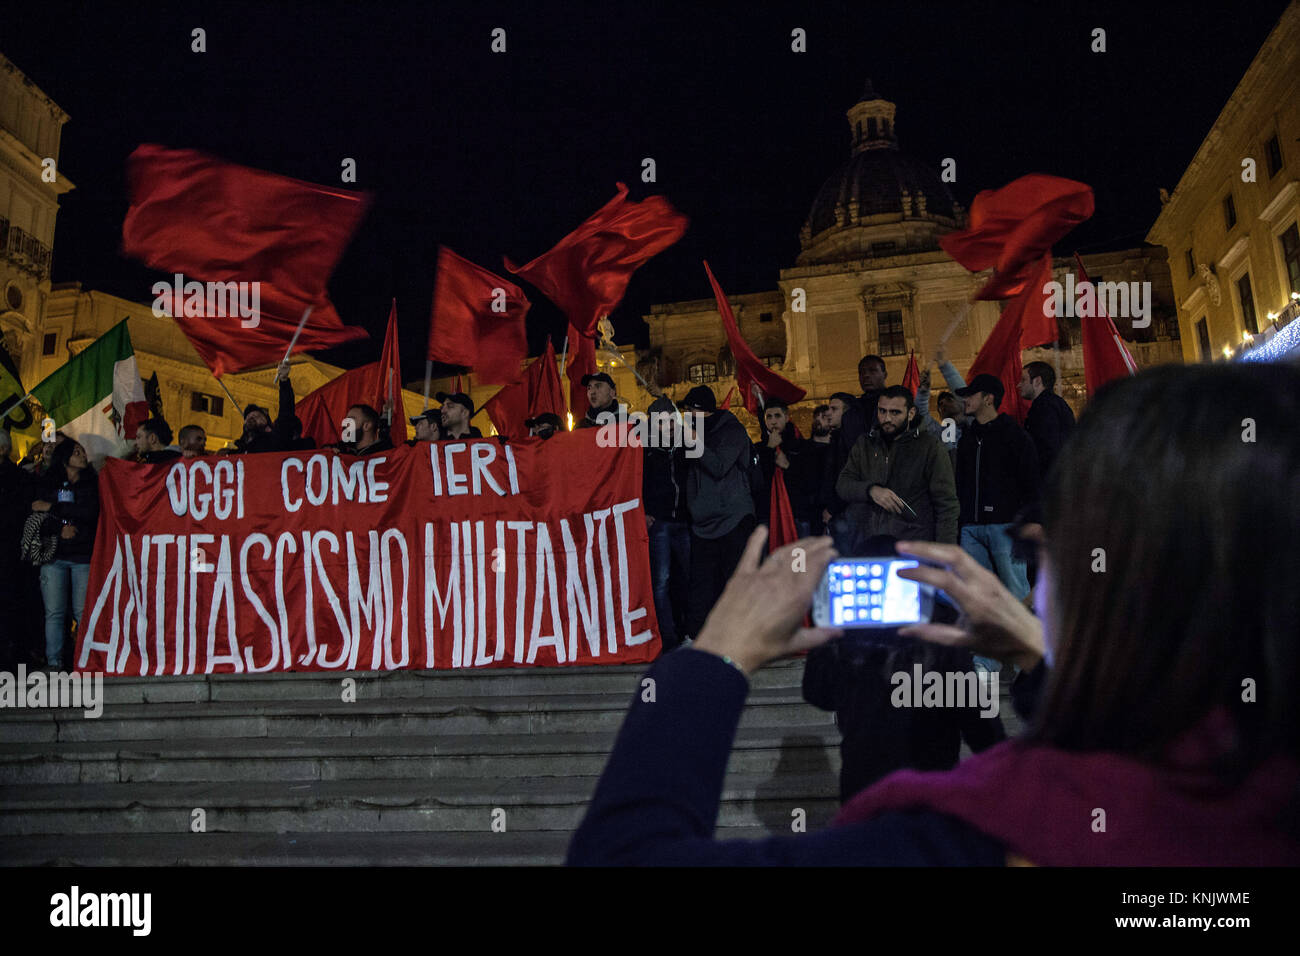 Palermo, Italy. 12th December, 2017. Antifascist militants participated a demonstration in Palermo to remember victims of the Piazza Fontana massacre. Stock Photo